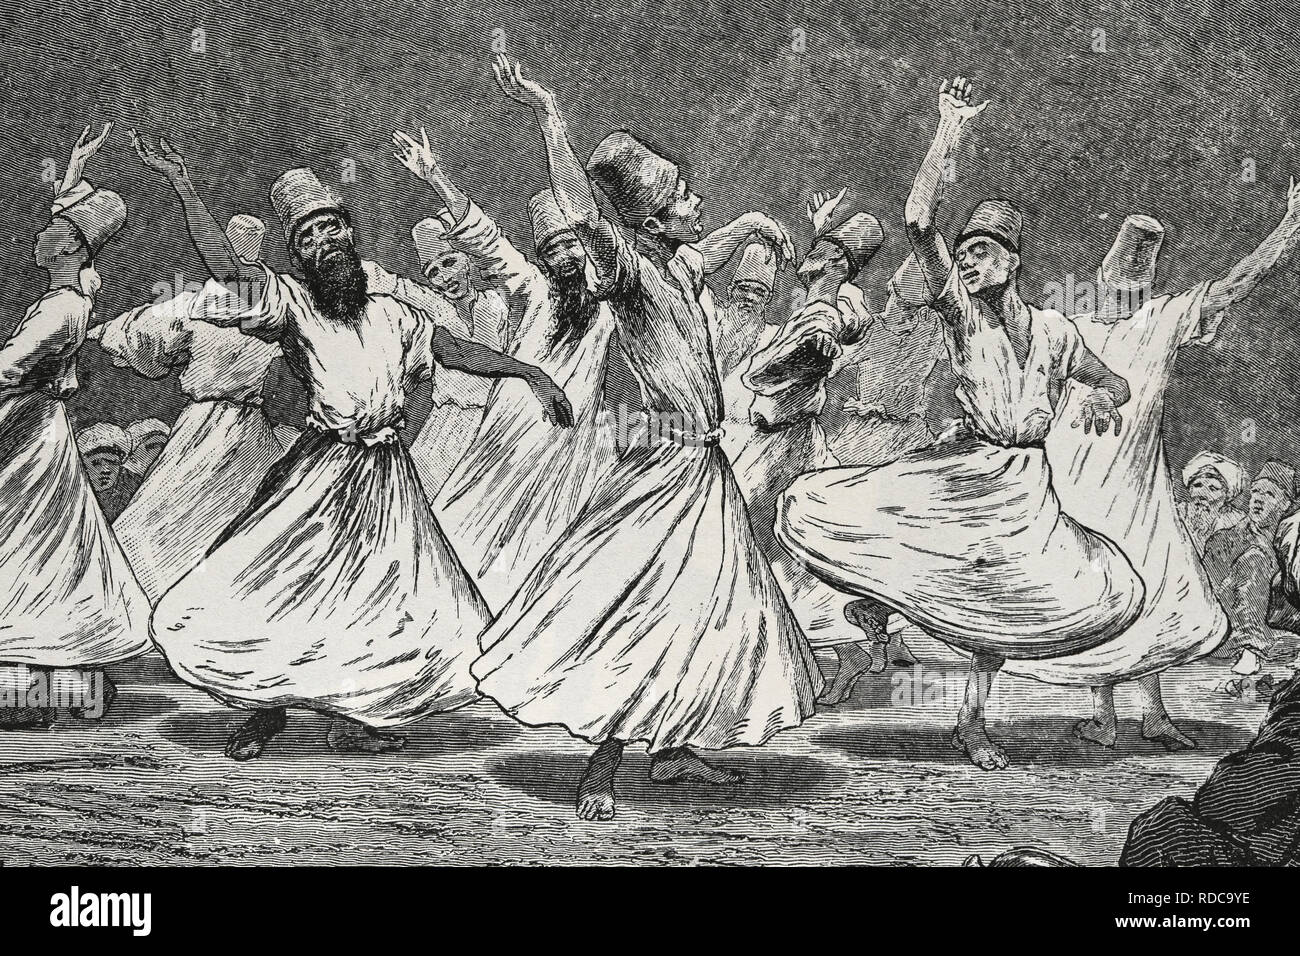 Whirling dervishes dancing. Engraving. 19th century. Turkey. Stock Photo